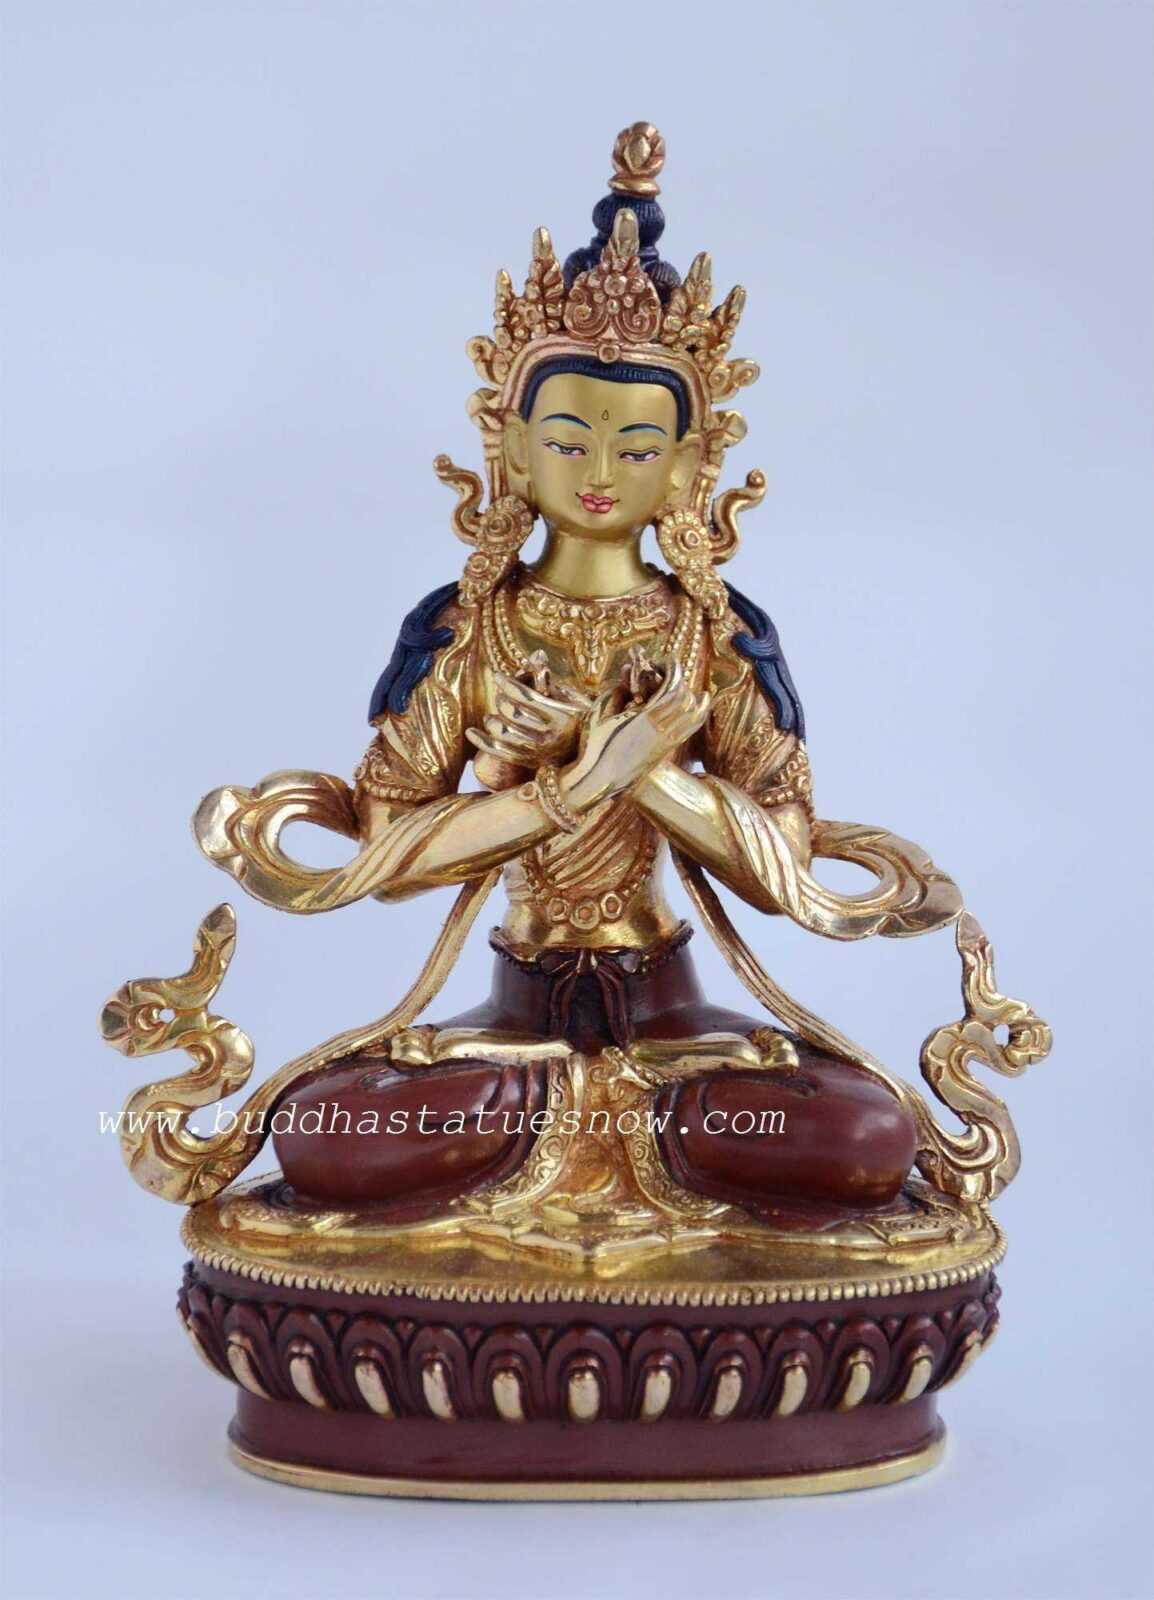 Partly Gold Gilded 9" Vajradhara Buddha Statues - Front